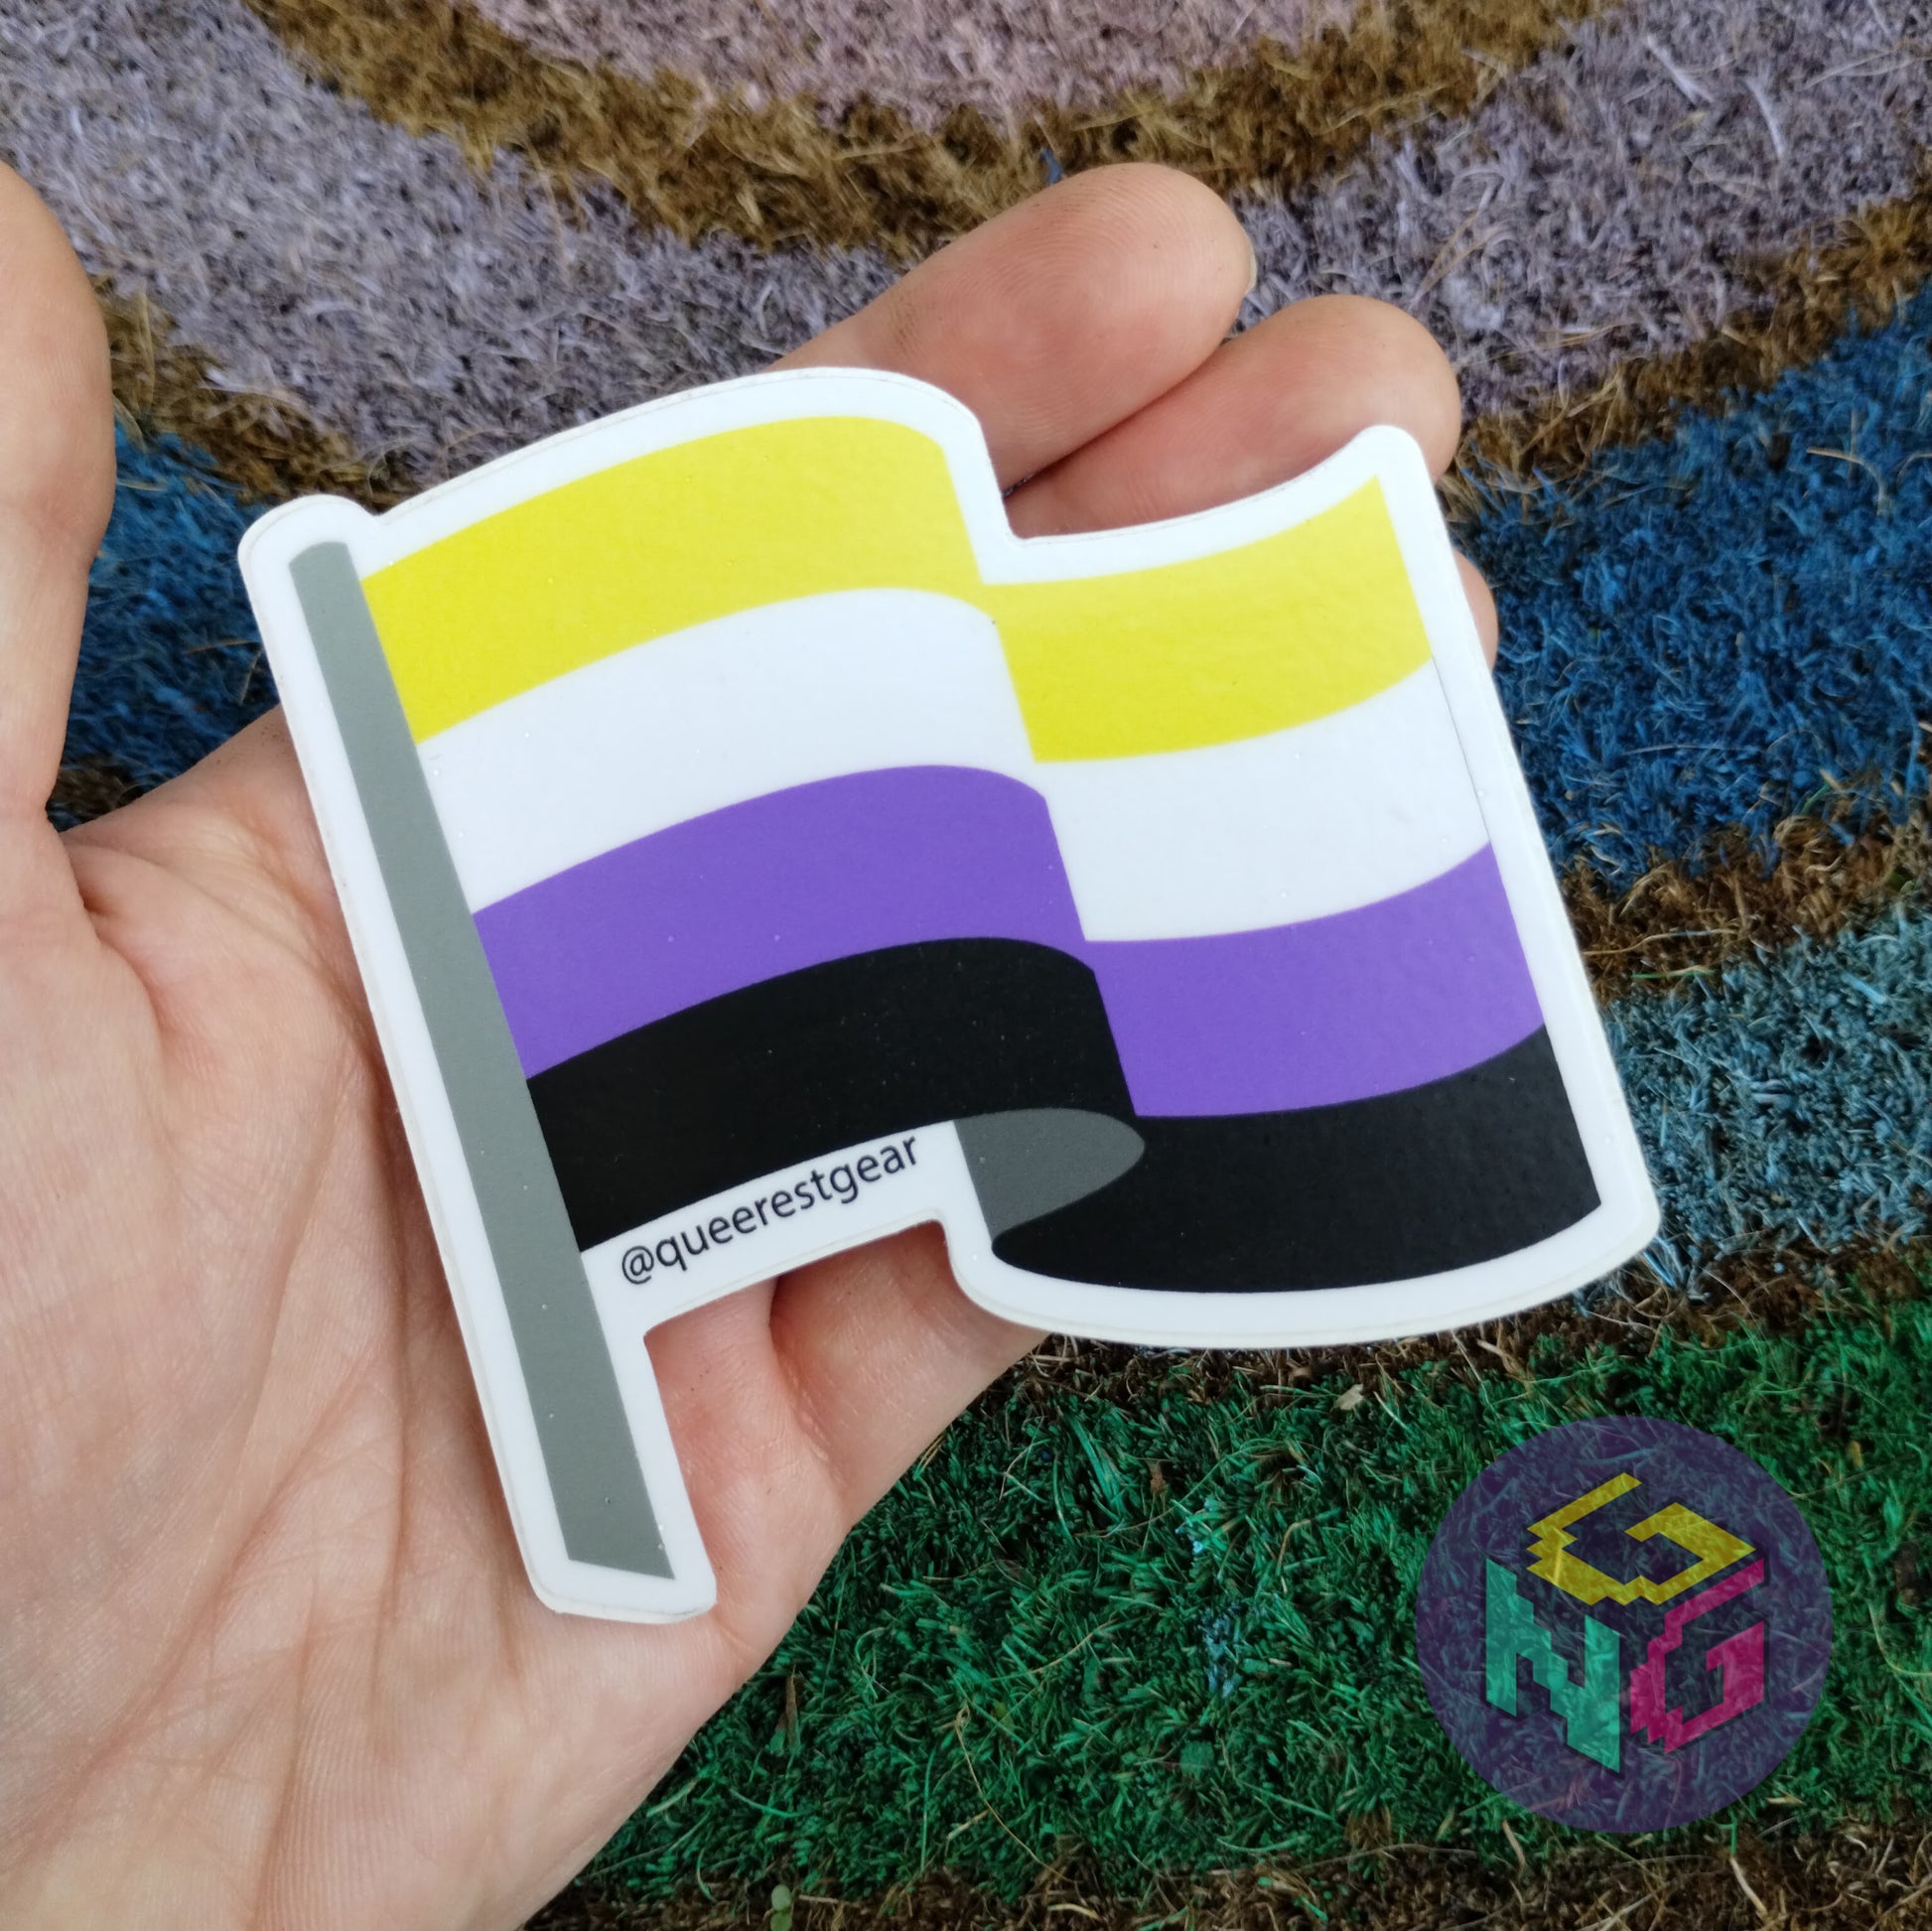 nonbinary flag sticker held in hand in front of rainbow welcome mat